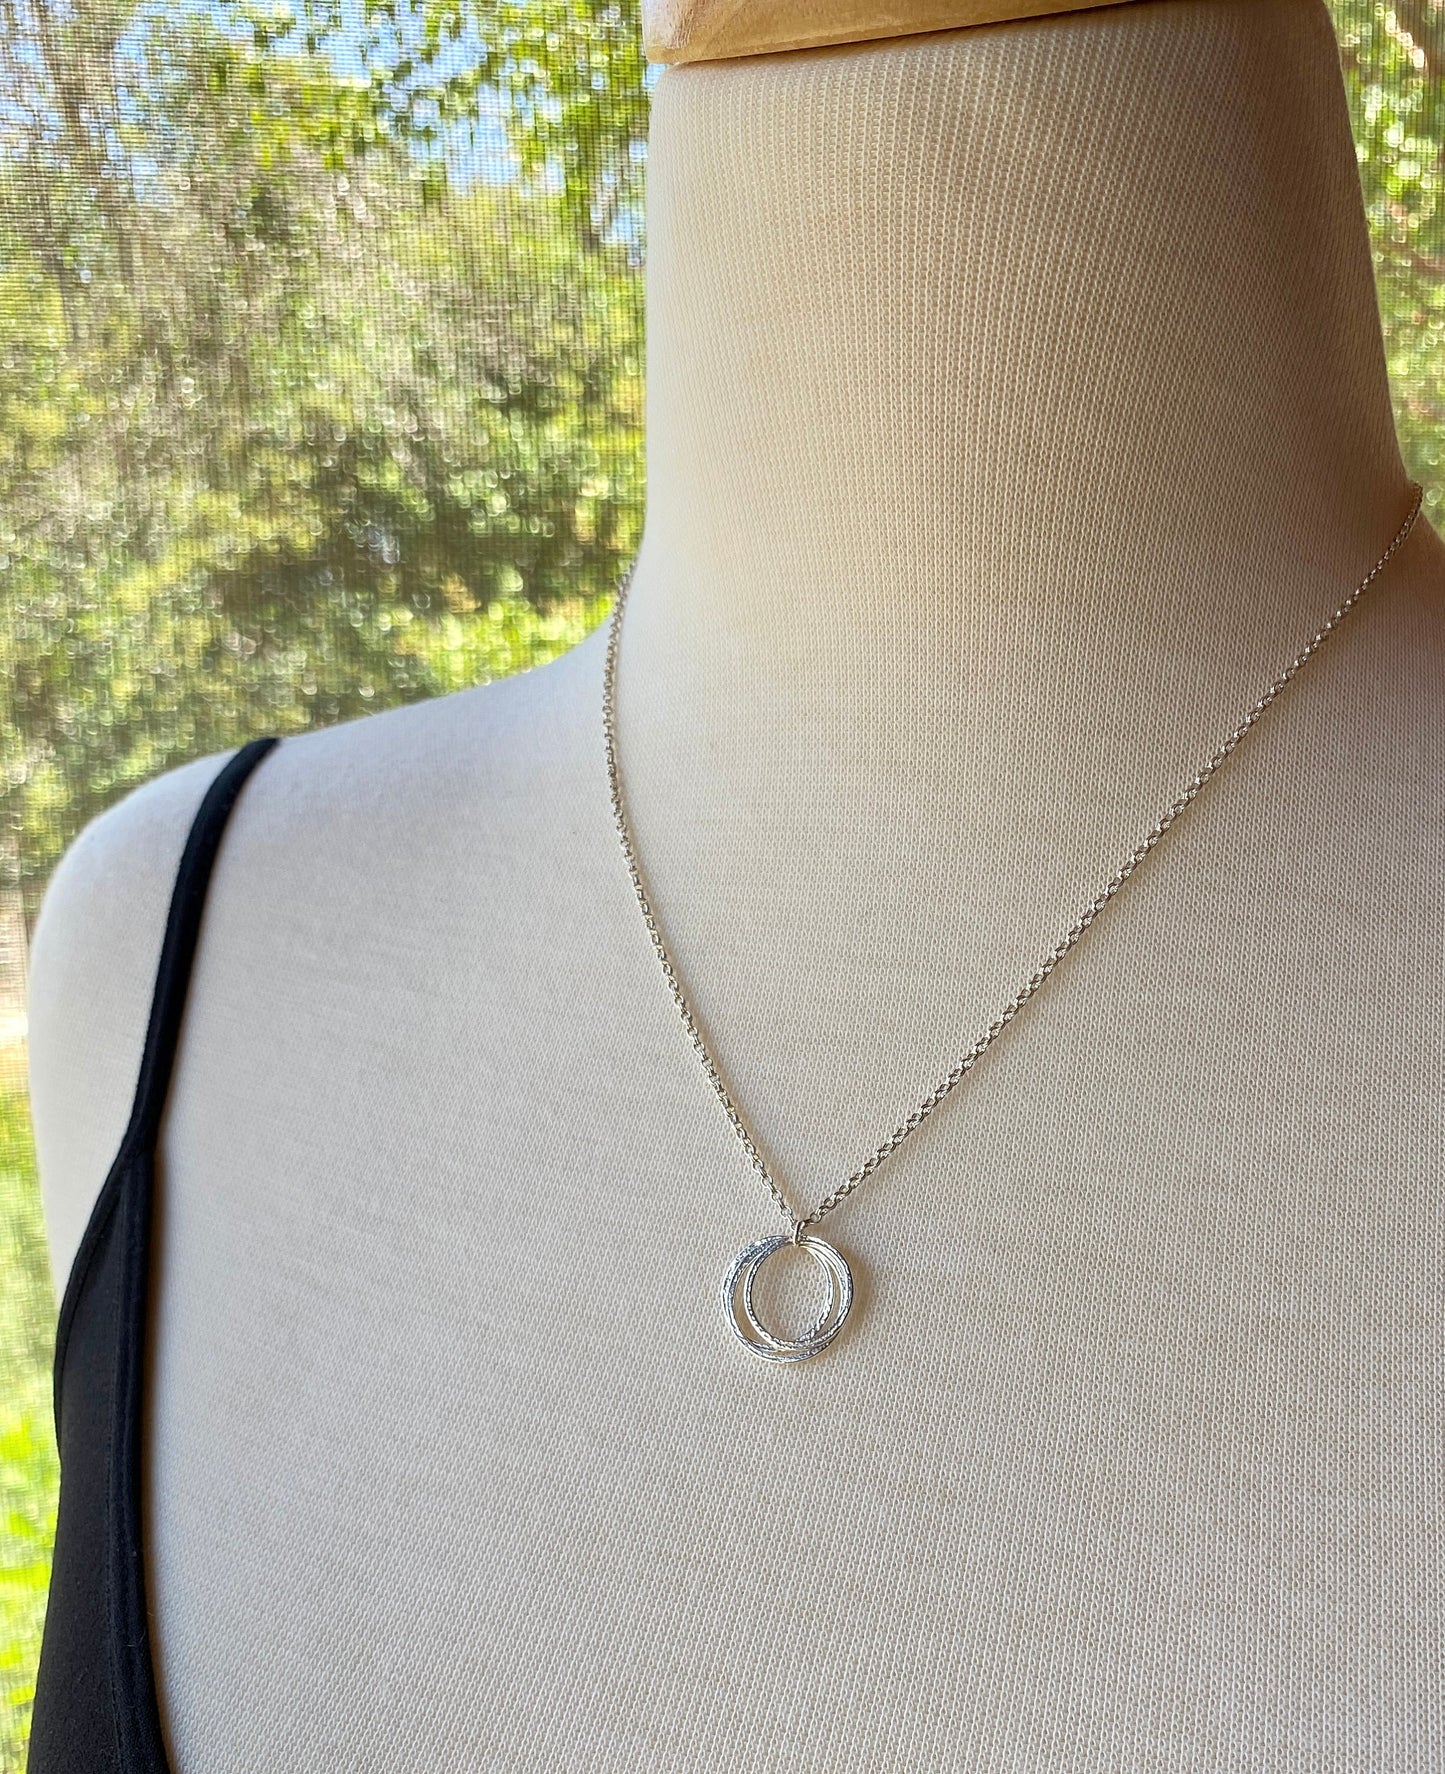 30th Birthday Sterling Silver Minimalist 3 Ring Pendant Necklace, Handcrafted Layered Sparkly Perfectly Imperfect Circles 3 Decades